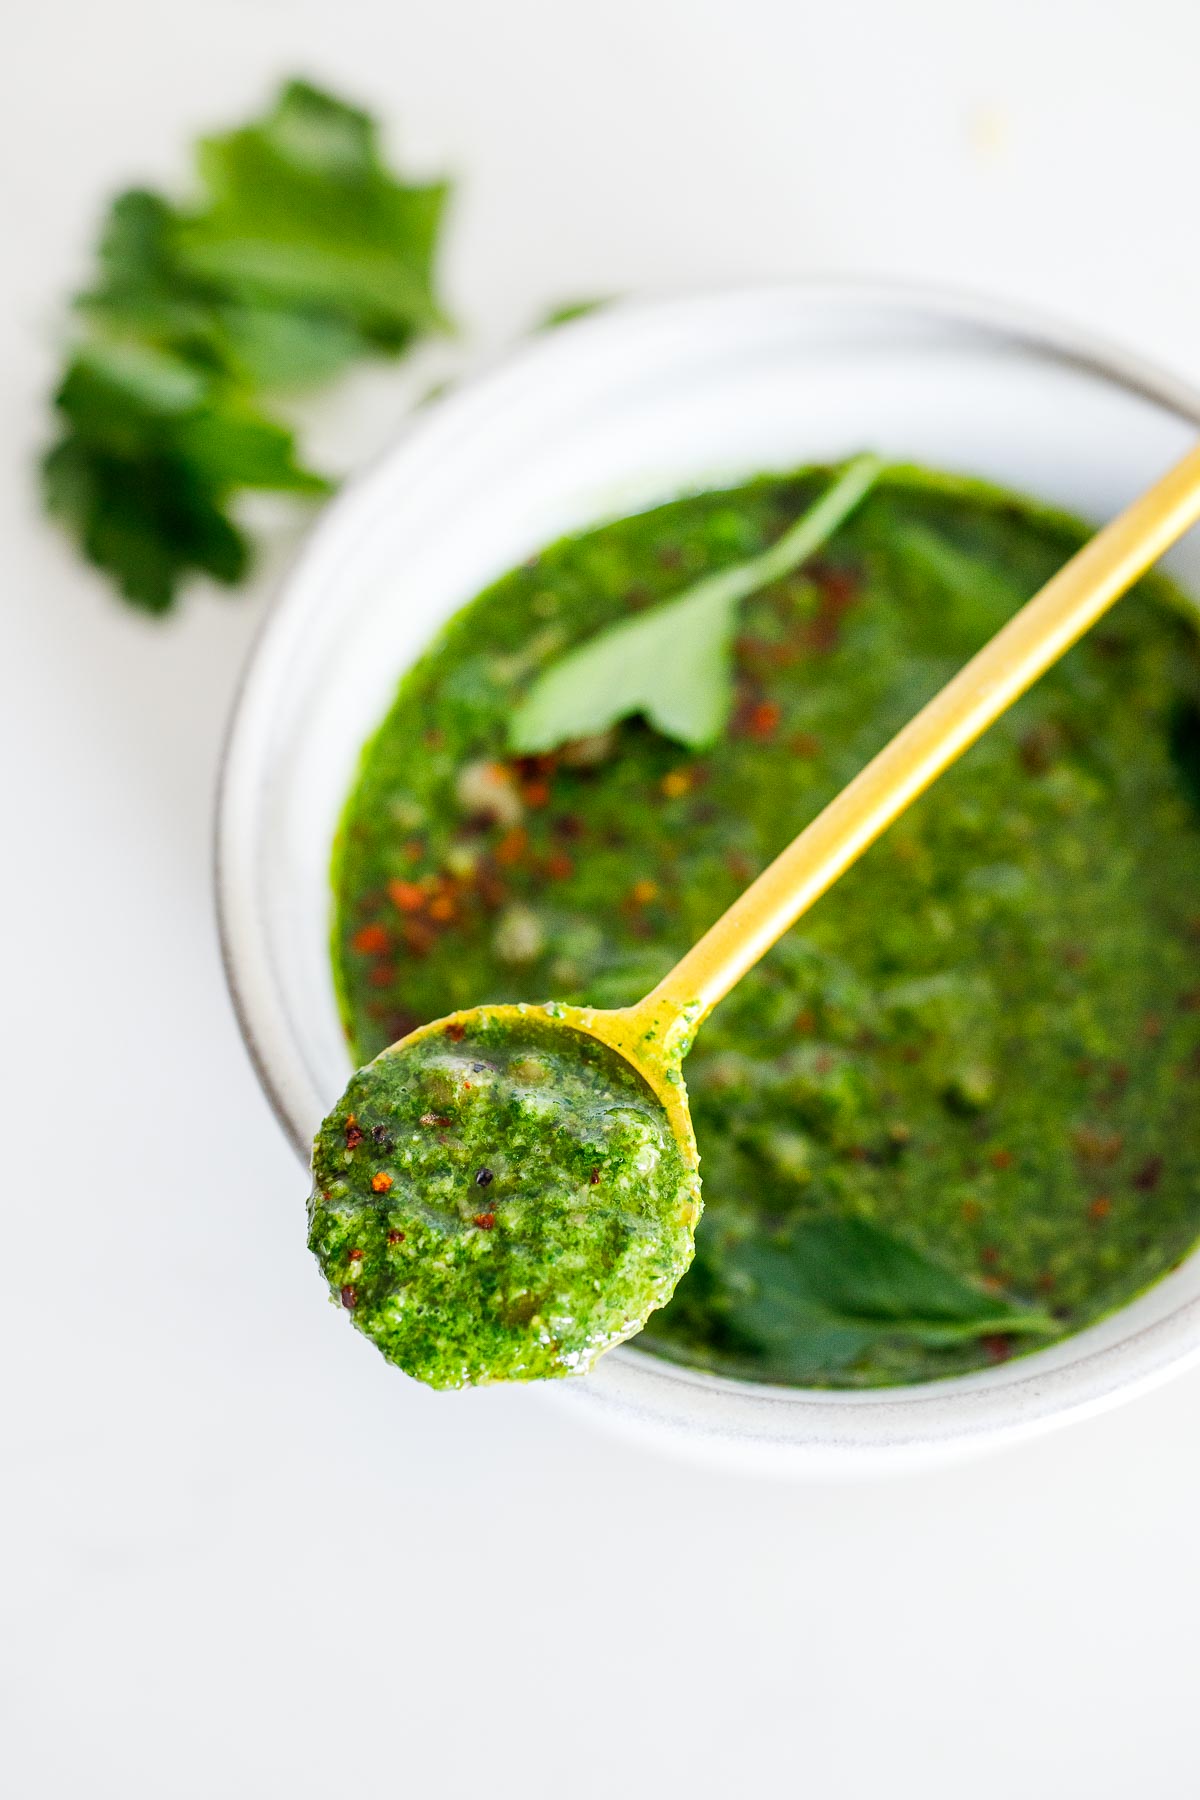 Give your meals a a punch of flavor with Italian Salsa Verde! This flavorful herby green sauce has  delicious depth of flavor from anchovies & capers. Delicious with fish, veggies, or meat. 